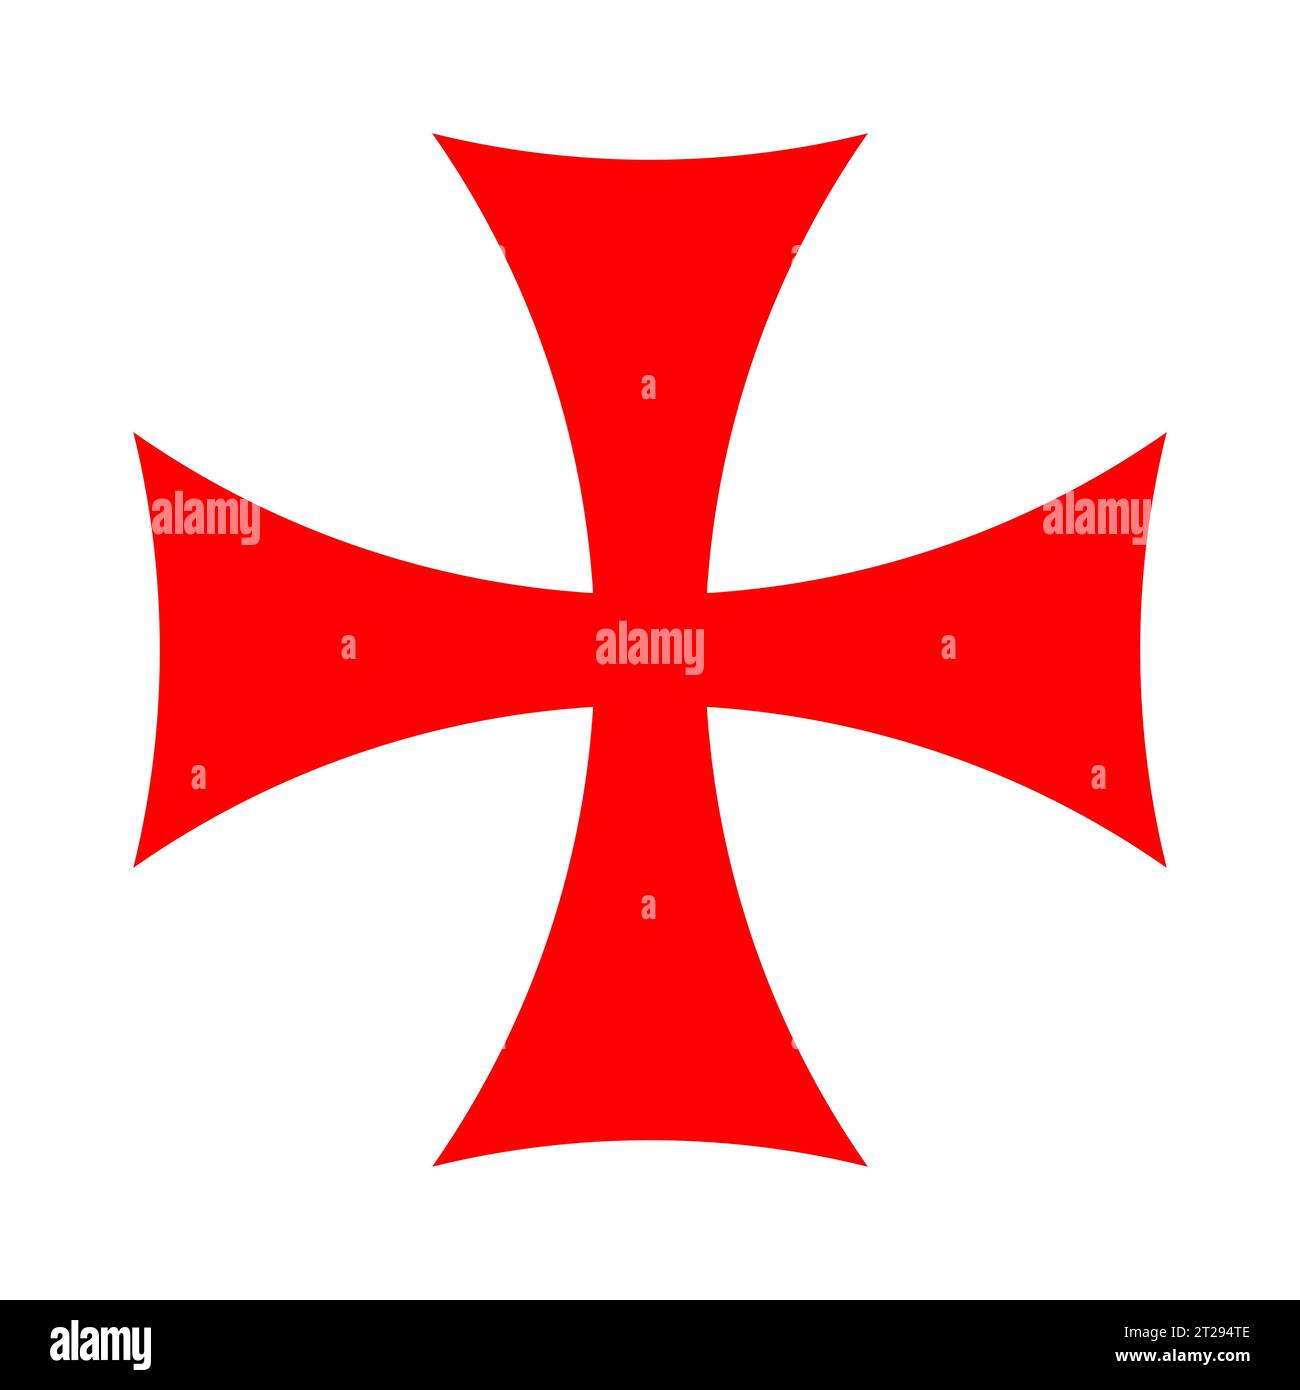 Knights Templar cross. Symbol of the Poor Fellow-Soldiers of Christ and of the Temple of Solomon. Military order of Catholic faith in the Middle Ages. Stock Photo